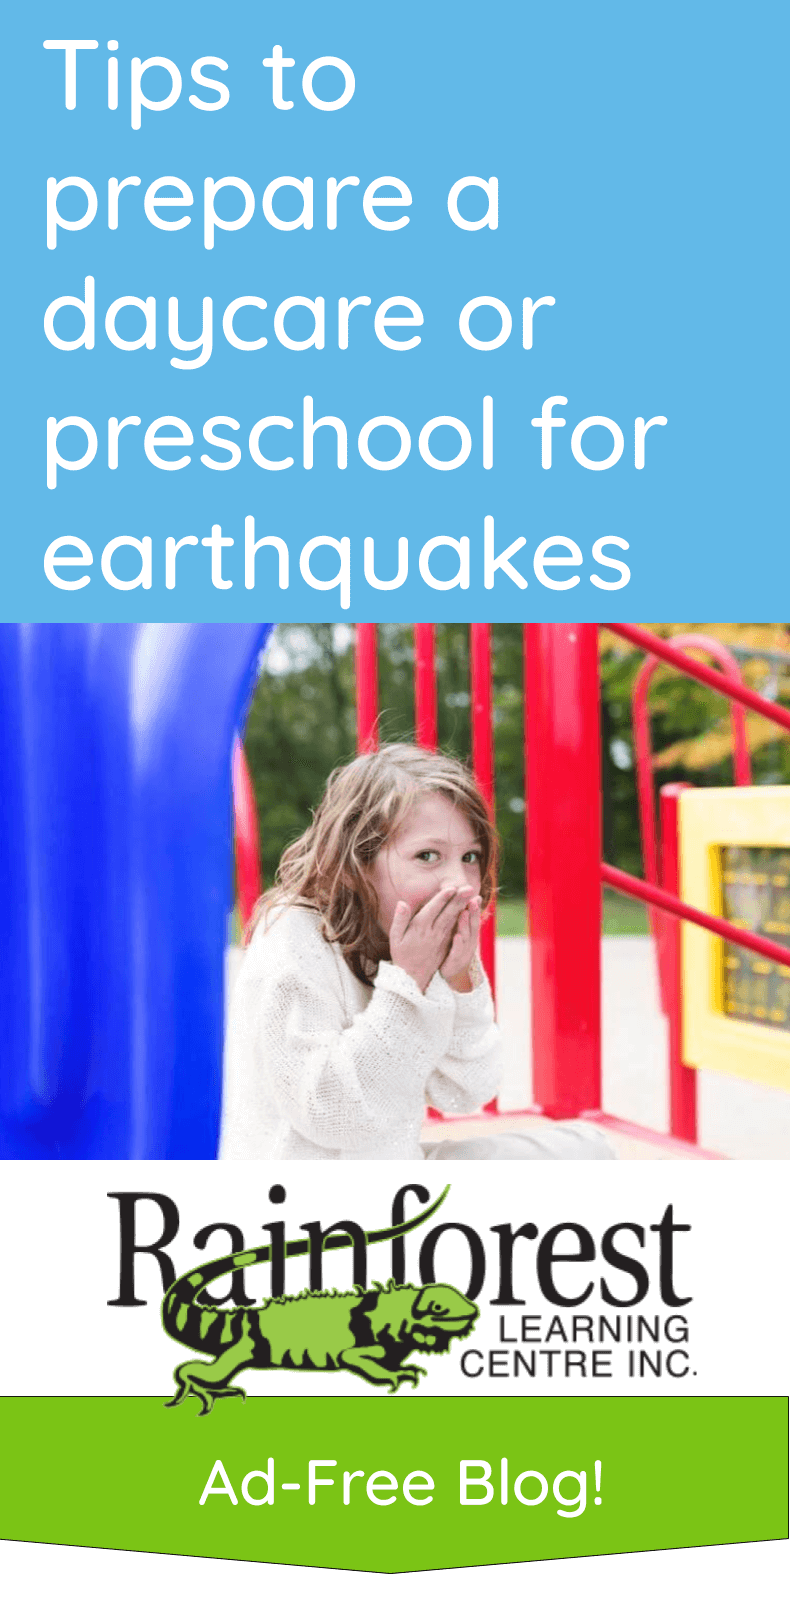 Tips to prepare a daycare or preschool for earthquakes - article pinterest image